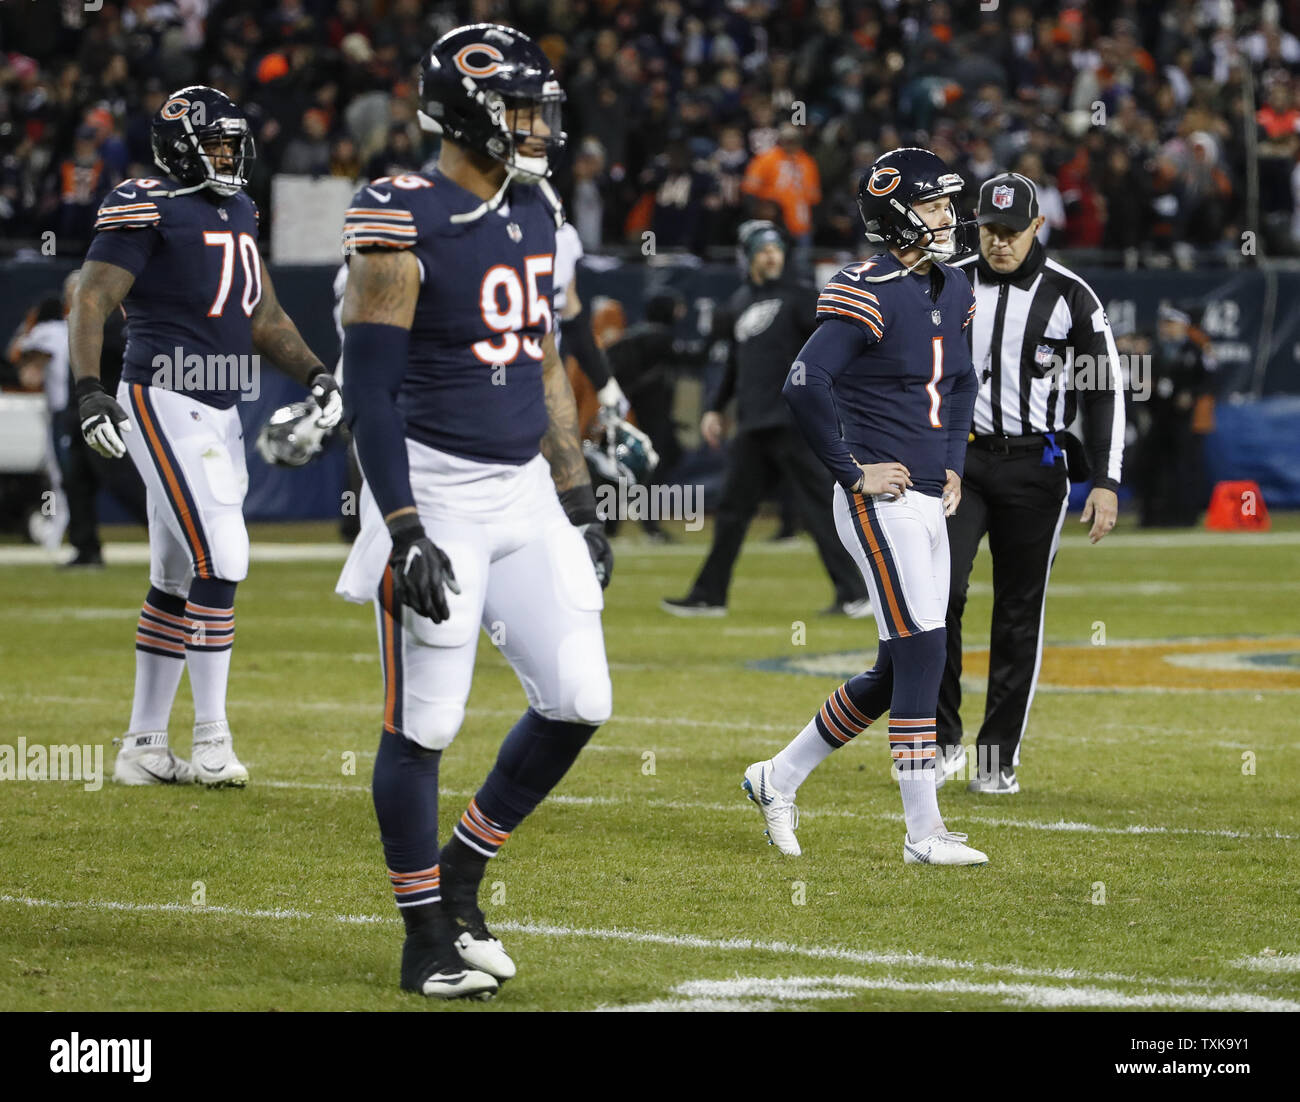 Chicago Bears kicker Cody Parkey (1) reacts after unsuccessful field goal attempt against the Philadelphia Eagles during the second half of an NFC Wild Card playoff game at Soldier Field in Chicago on January 6, 2019. Photo by Kamil Krzaczynski/UPI Stock Photo